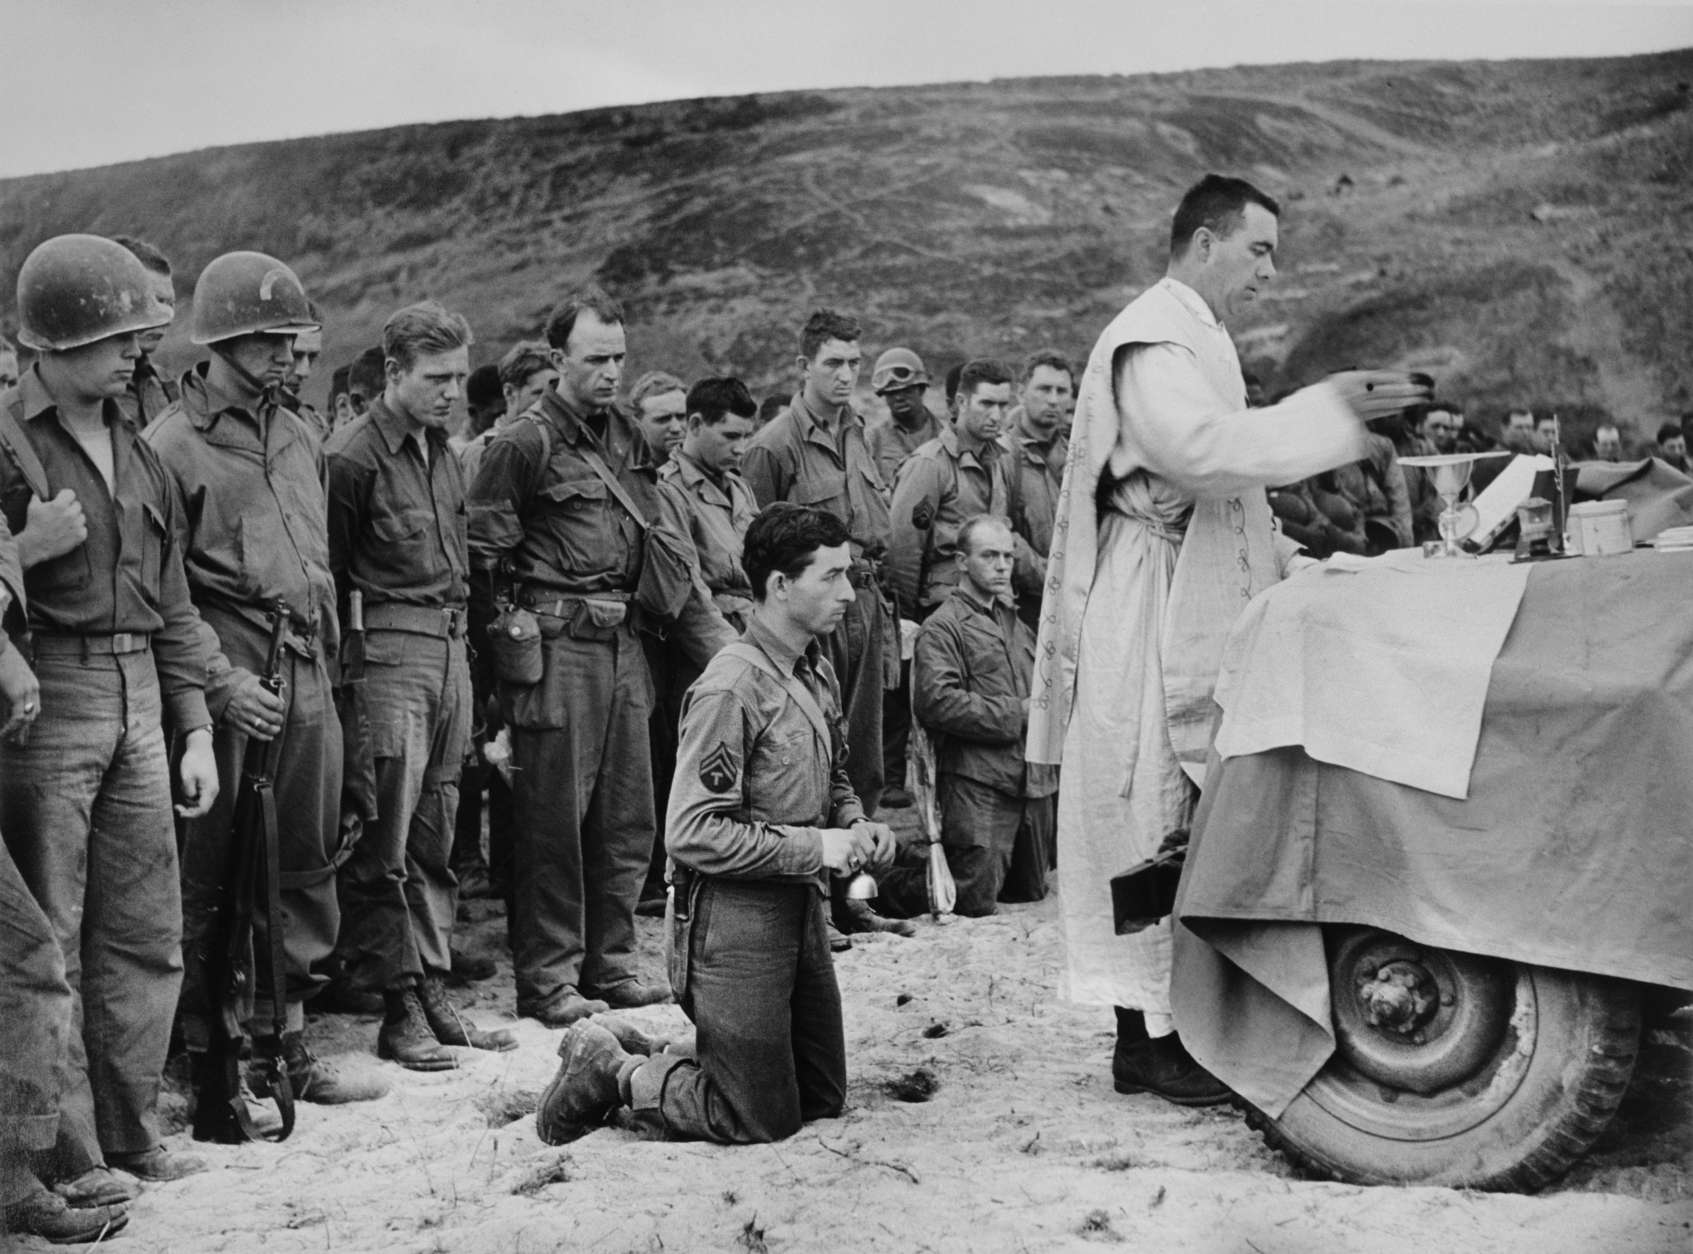 Robert Capa, [Using the hood of a jeep as an altar, a Roman Catholic chaplain saying mass at the inauguration of an American cemetery, Omaha Beach, Normandy], June 1944
©International Center of Photography/Magnum Photos  